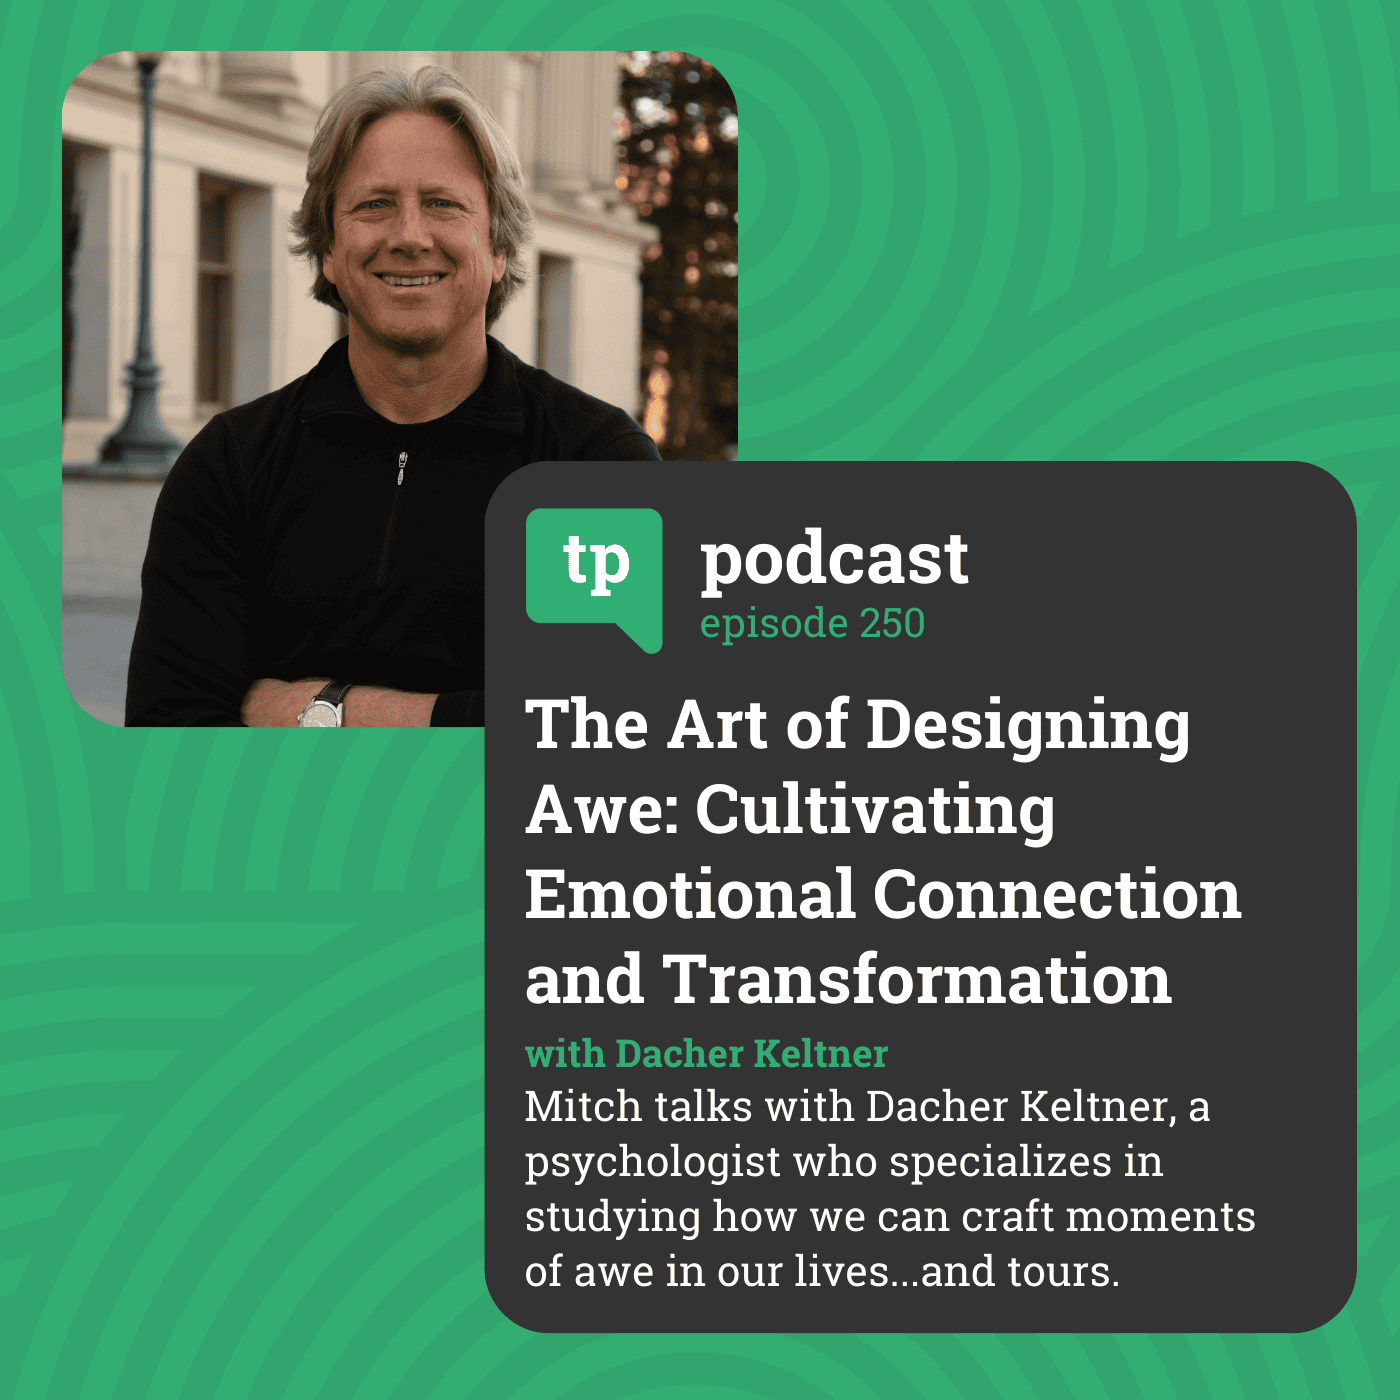 The Art of Crafting 'Awe': The Psychology of making lasting tour memories (w/ Psychologist Dacher Keltner)